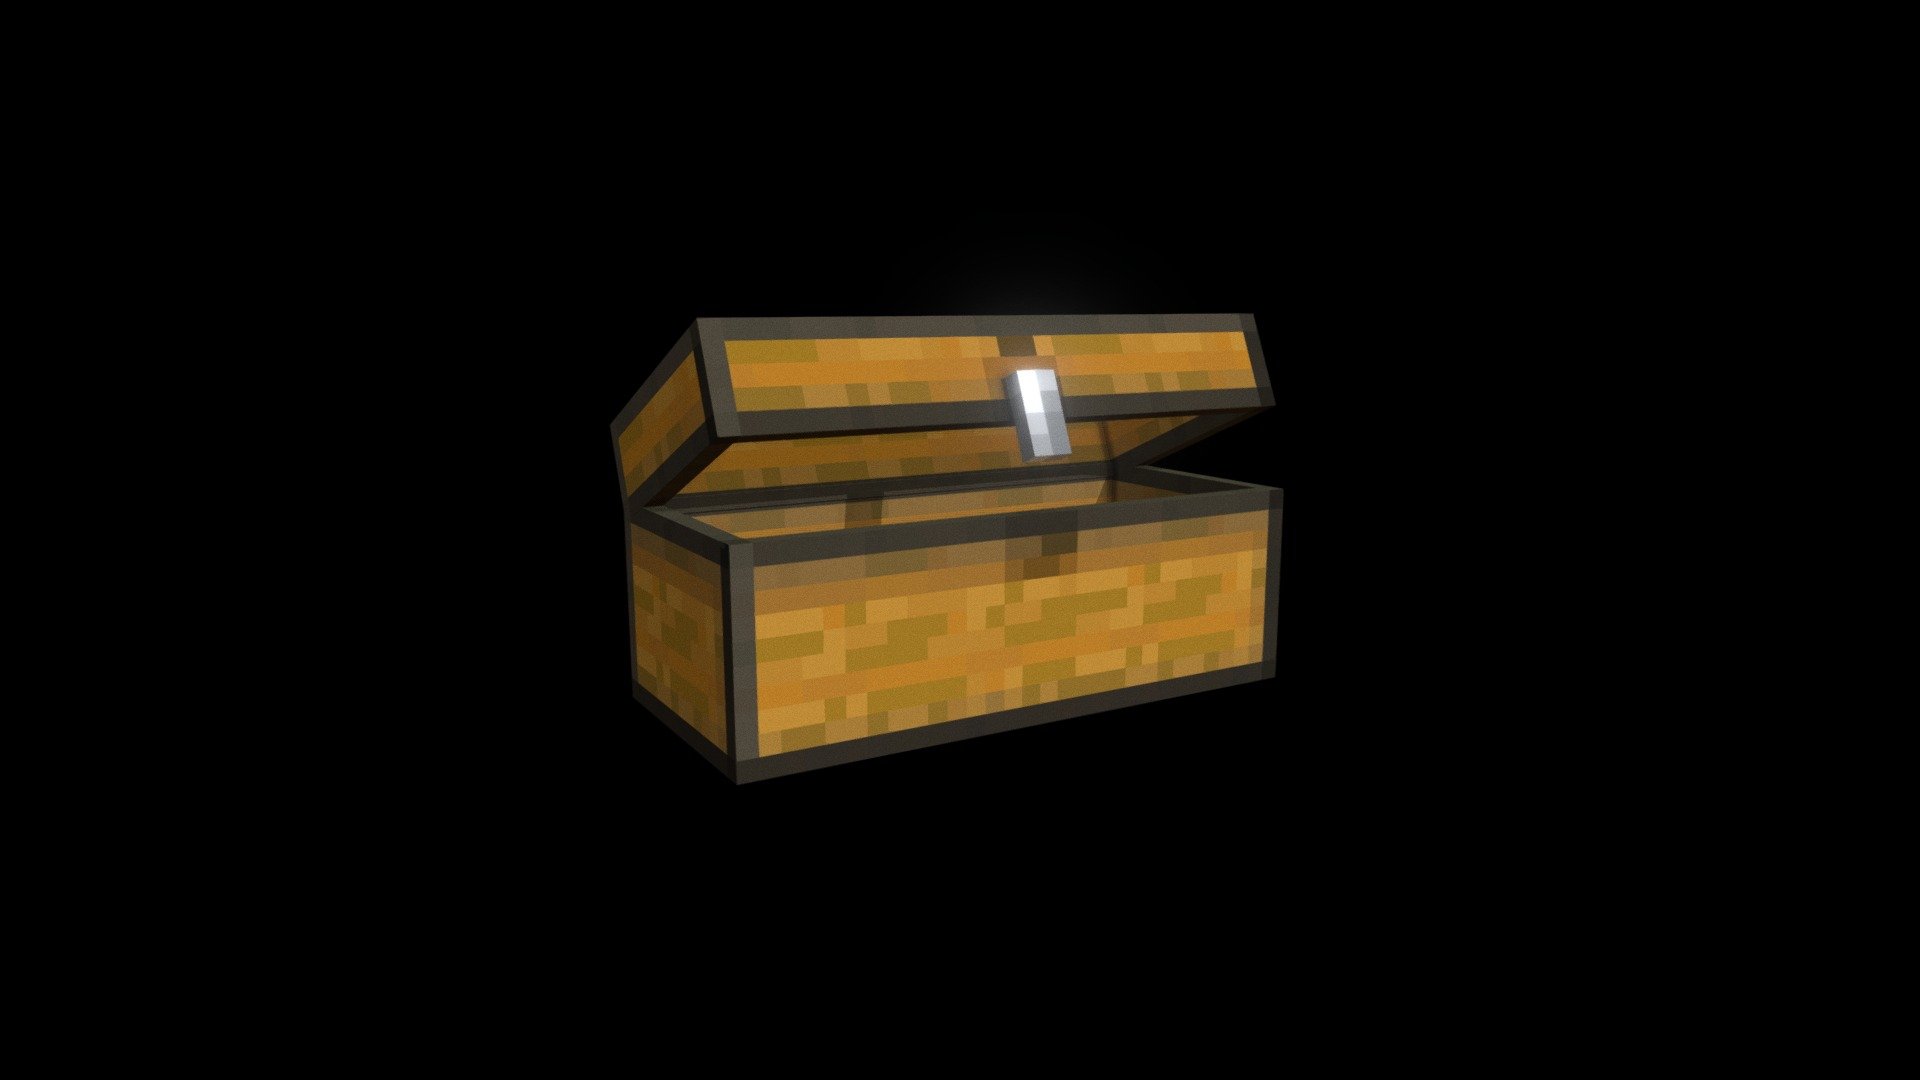 Minecraft Large Chest - 3D model by Mareon (@mareoncz) [a4b4f28]